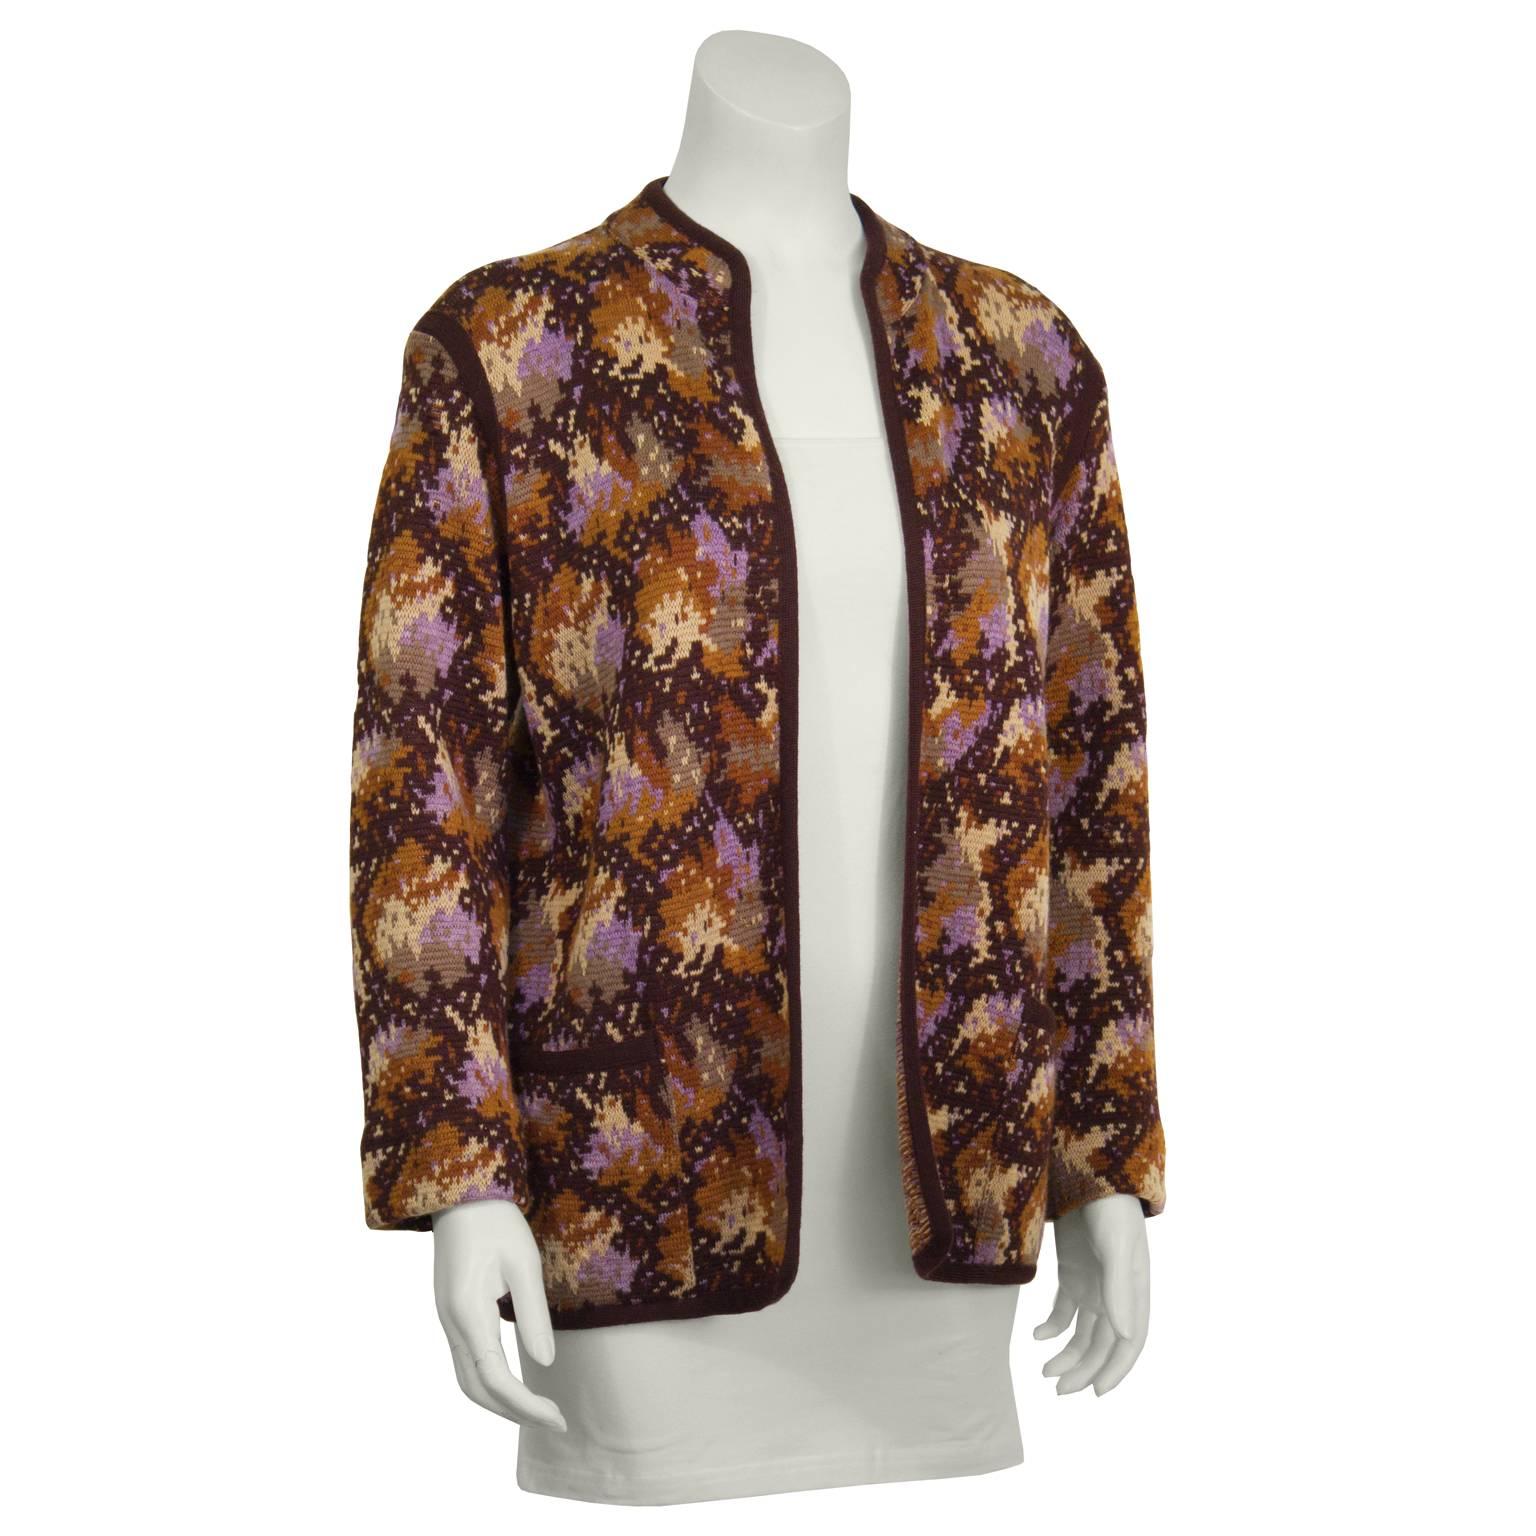 Mix comfort and style with this adorable Yves Saint Laurent brown and beige intarsia knit cardigan. Features a dark brown trim and a knit abstract pattern with notes of amber, beige, brown and purple. Excellent vintage condition. Fits like a US 4-6. 